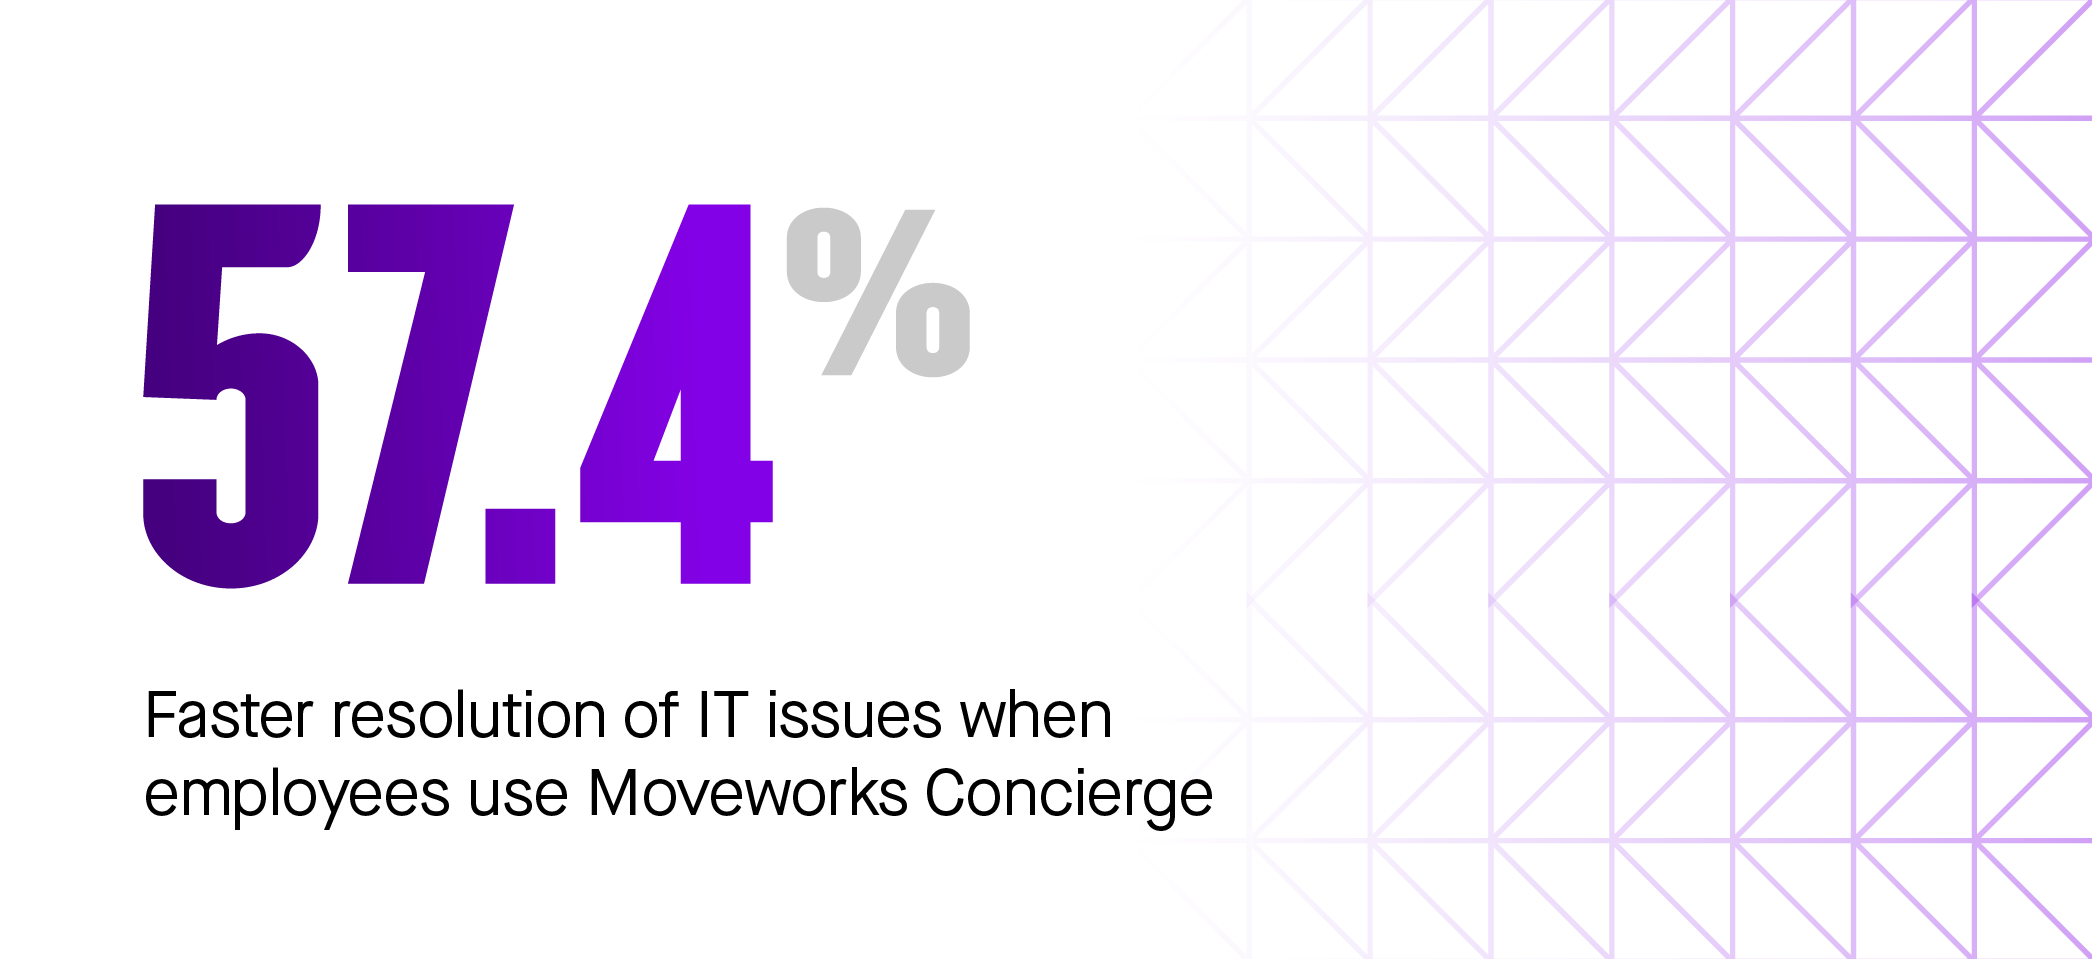 57 percent faster resolution using moveworks concierge